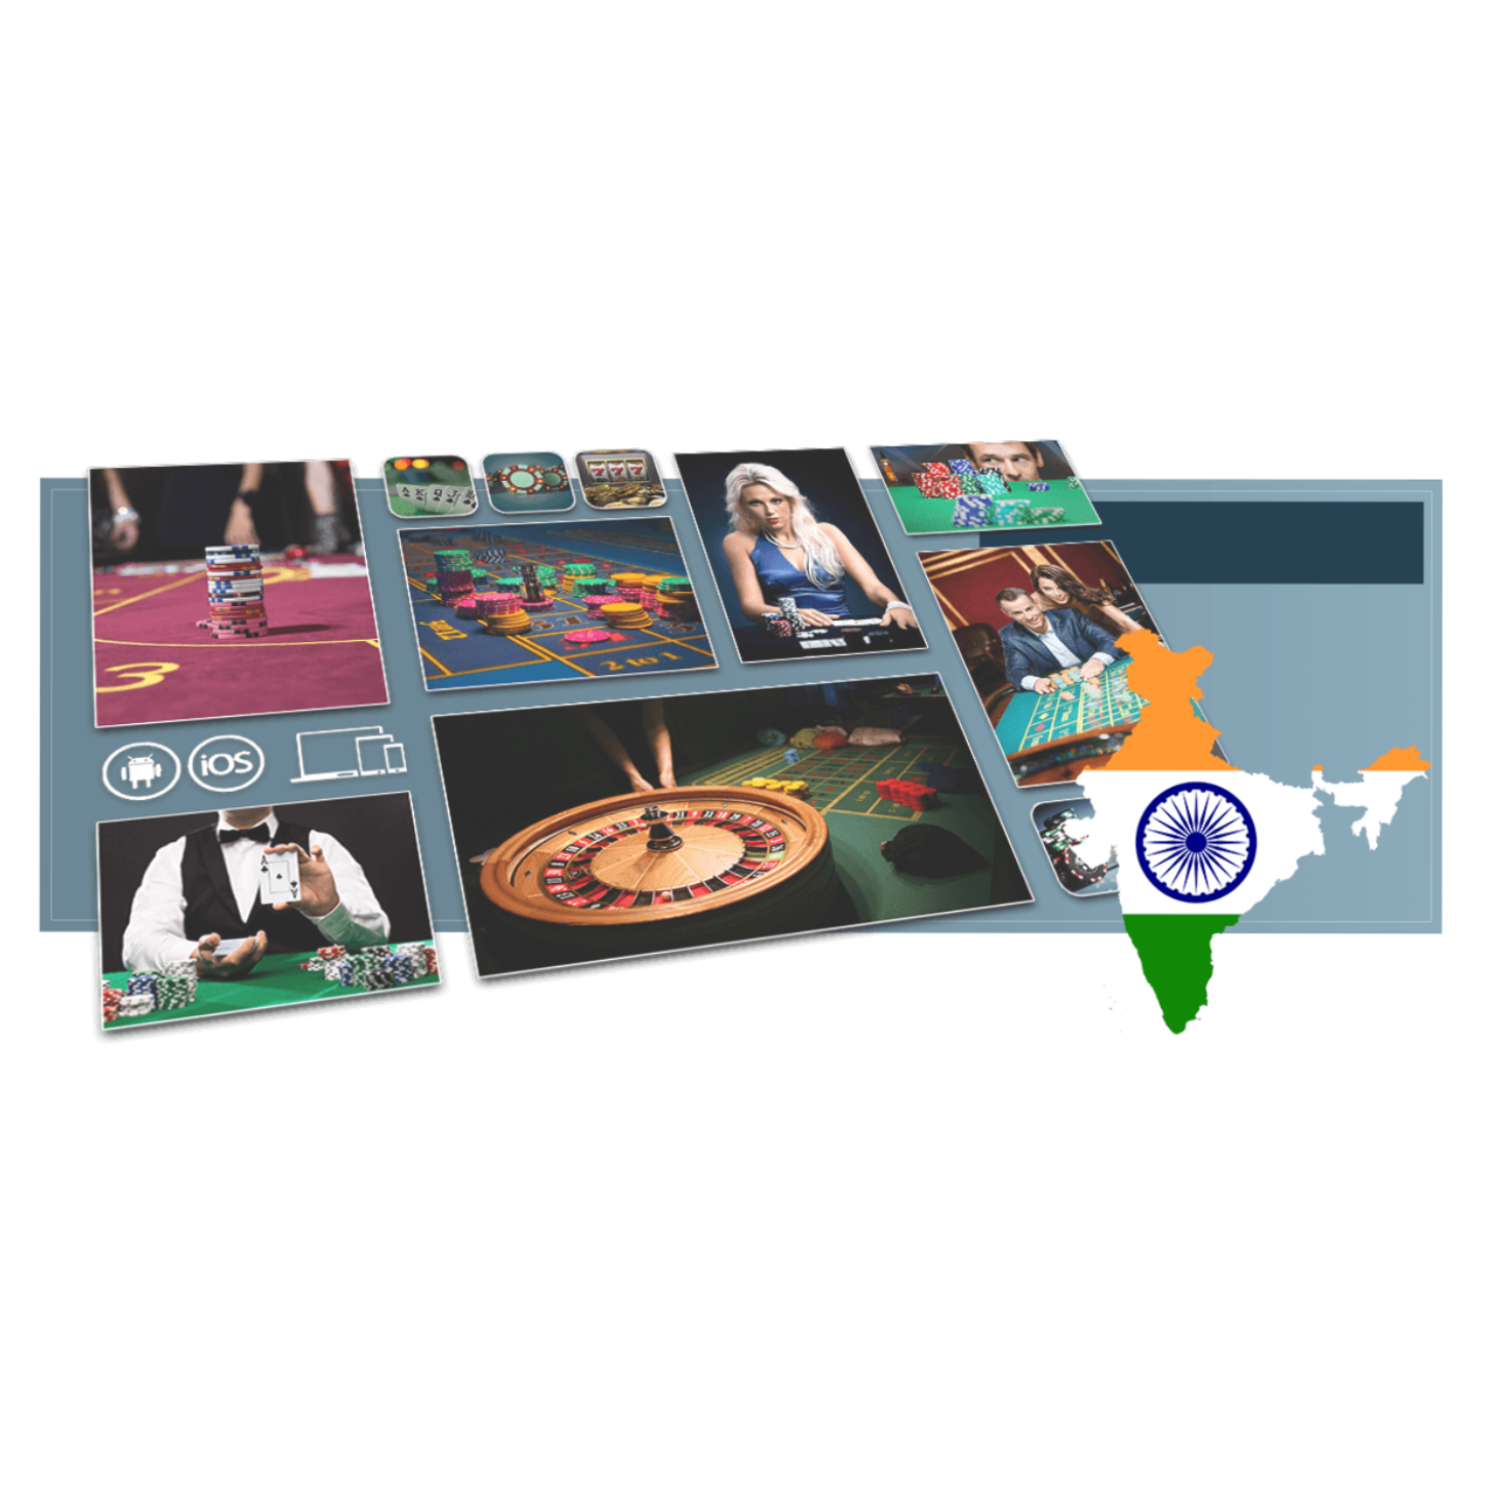 Learn more about the nest online casinos in India from our webiste.